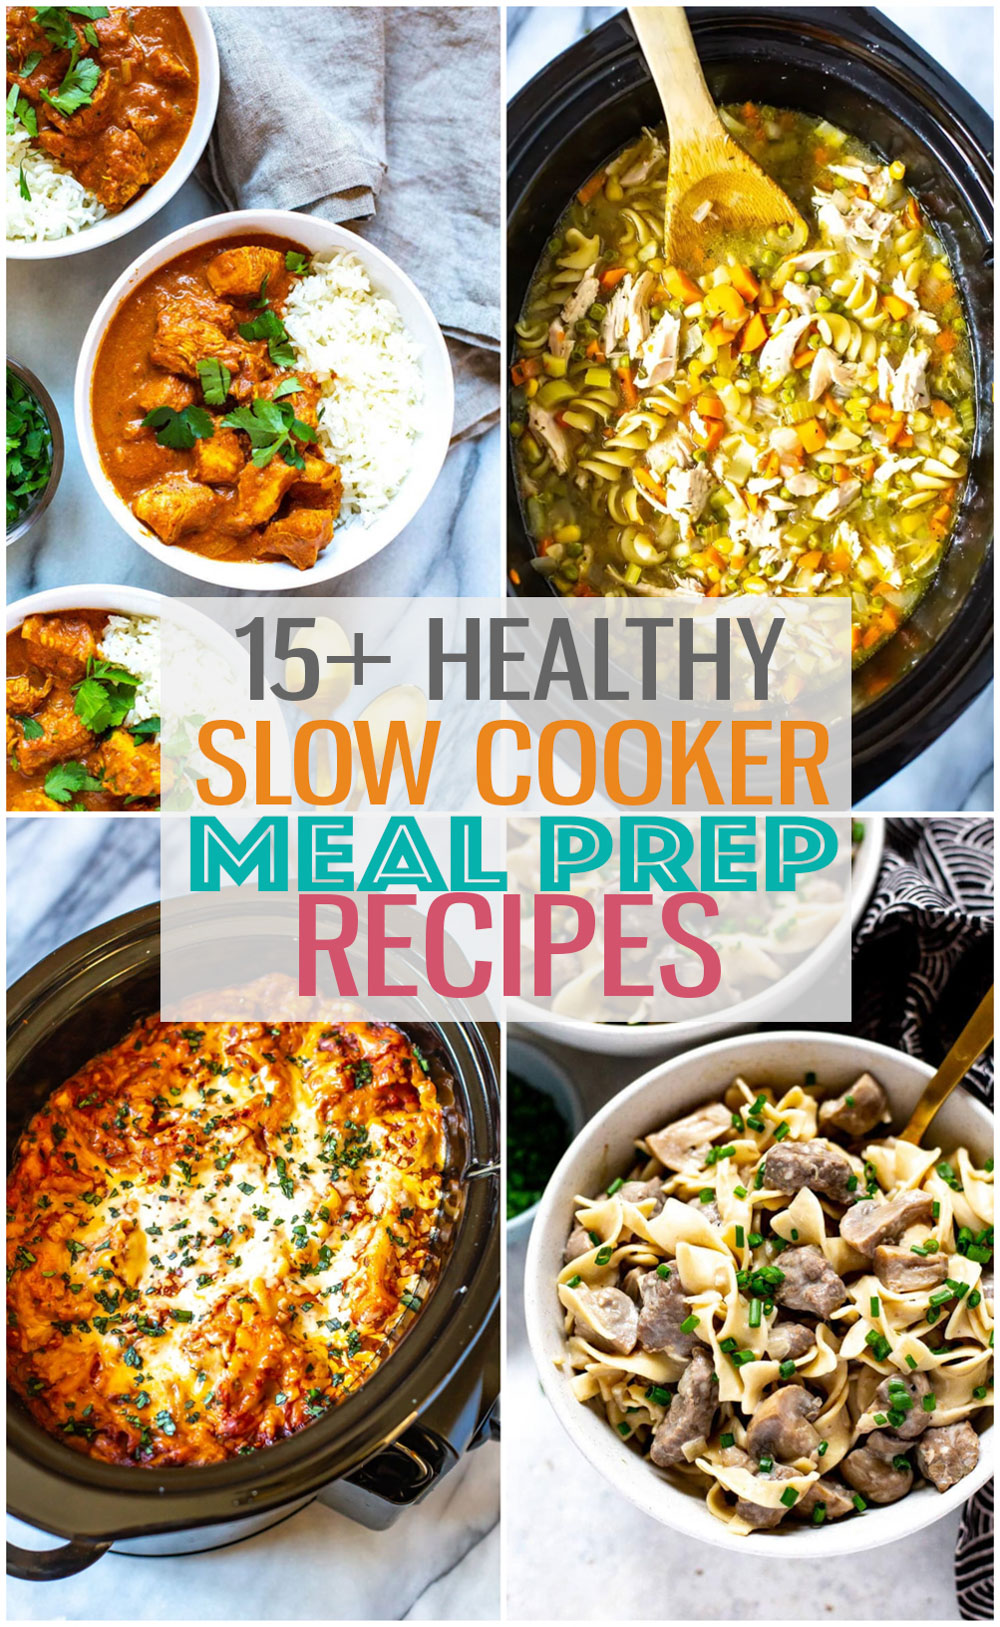 Slow cooker meal prep recipes